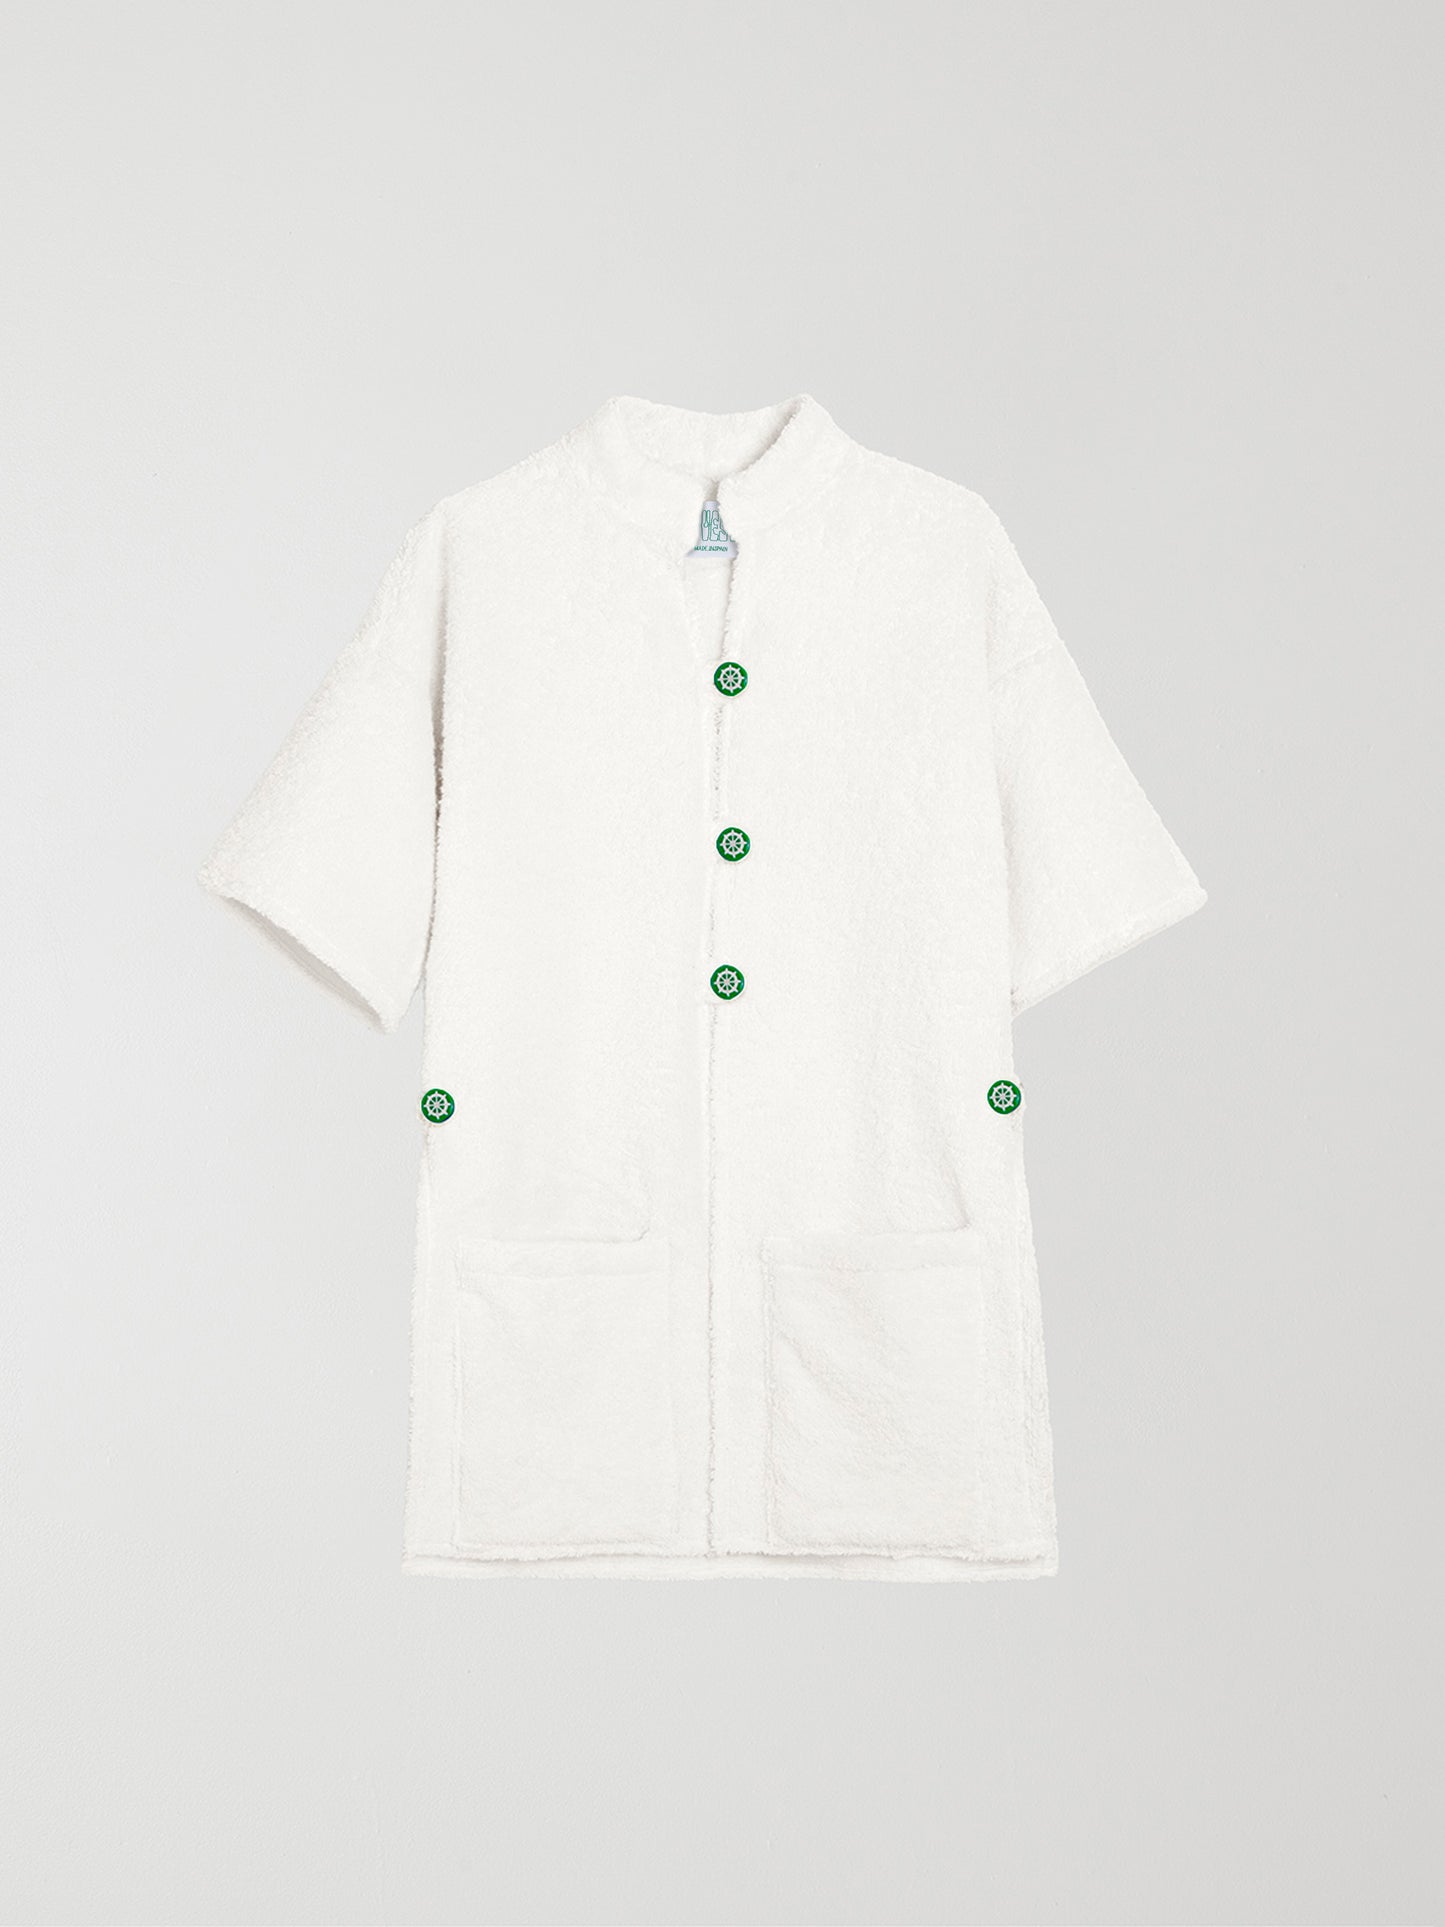 Ship Weel White Kimono is a short-sleeved kimono made of white towel fabric and matching green rudder buttons.